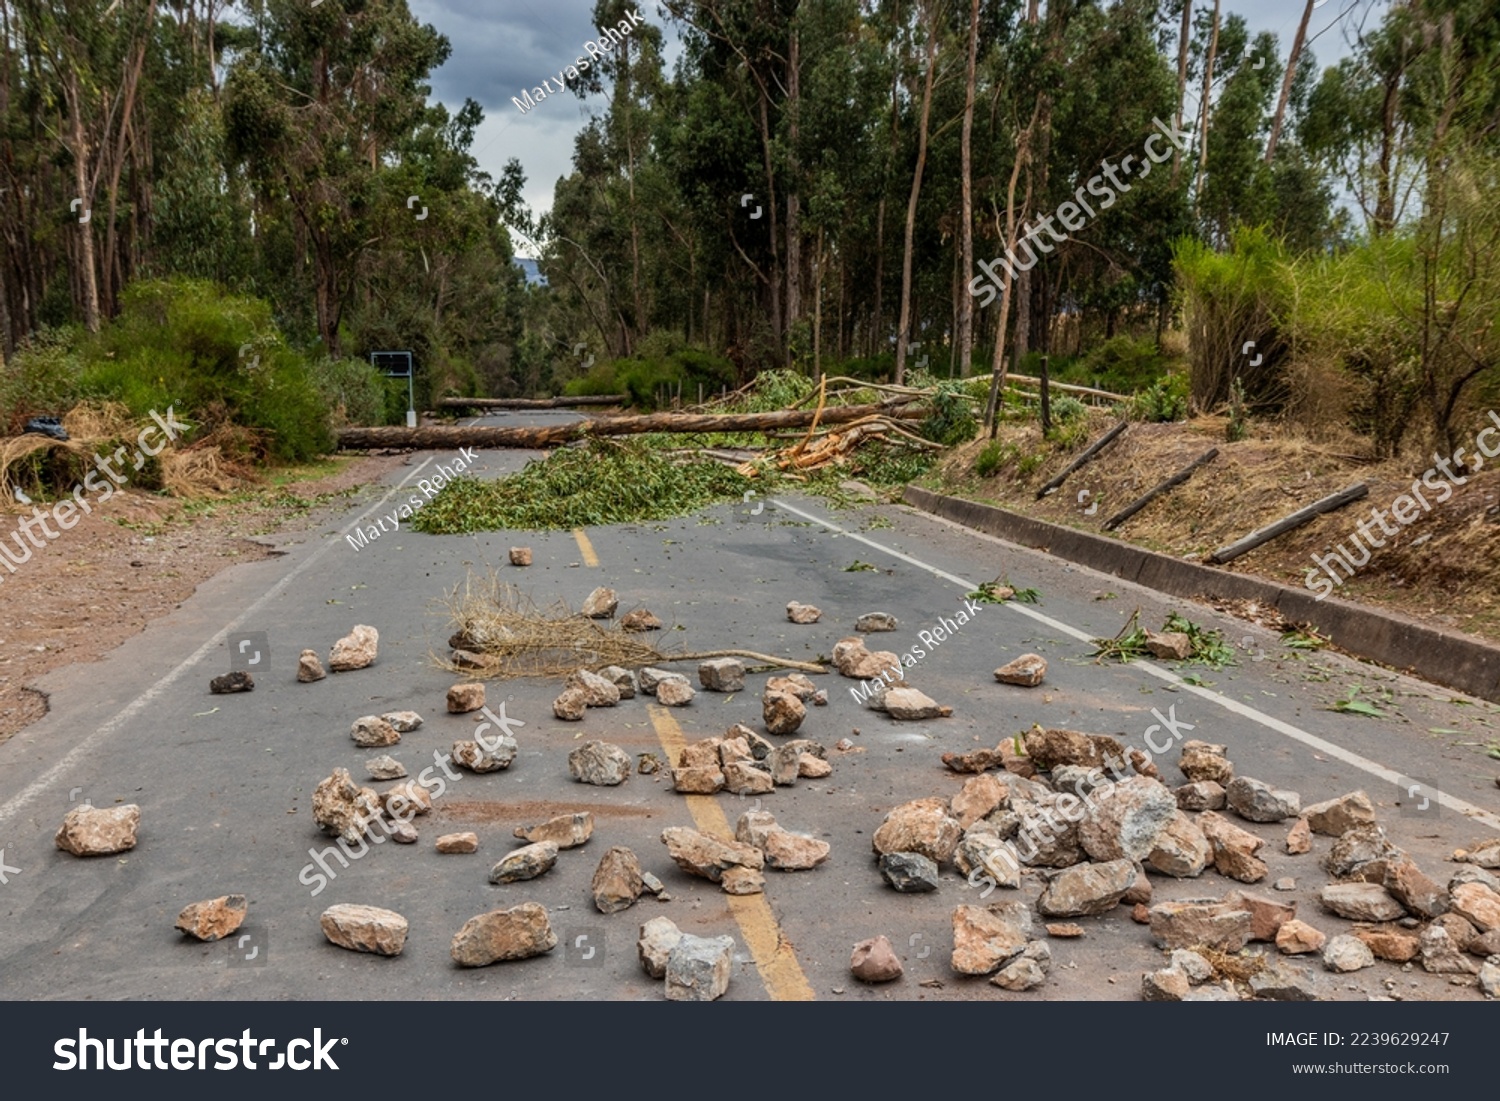 Stones and trees blocking 28G road during protests on December 15, 2022 near Cusco, Peru #2239629247